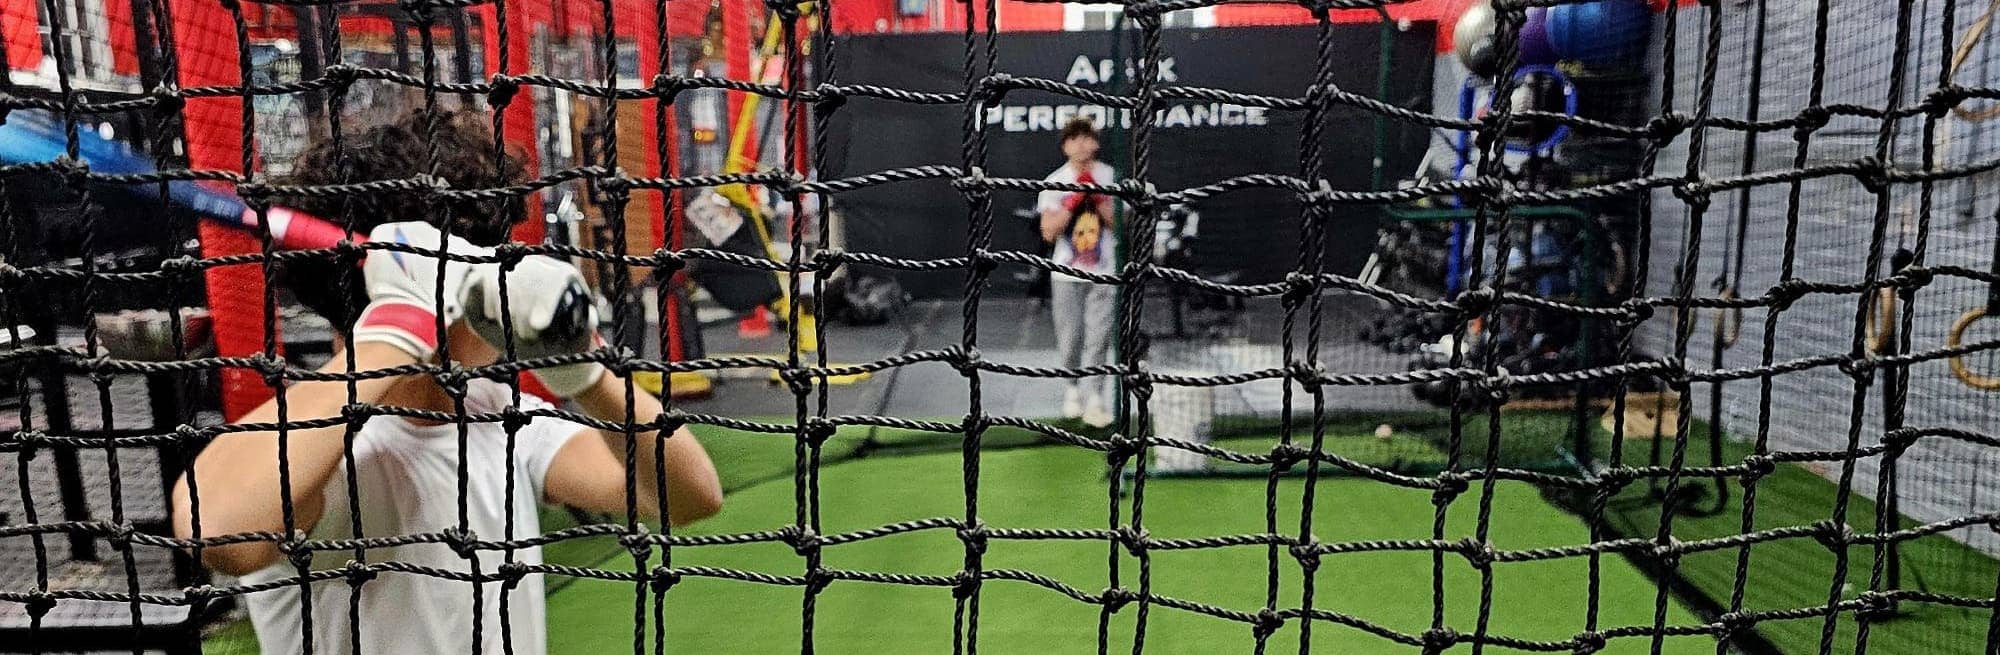 Behind-the-net perspective of a baseball athlete mid-swing at Apex Performance Gym